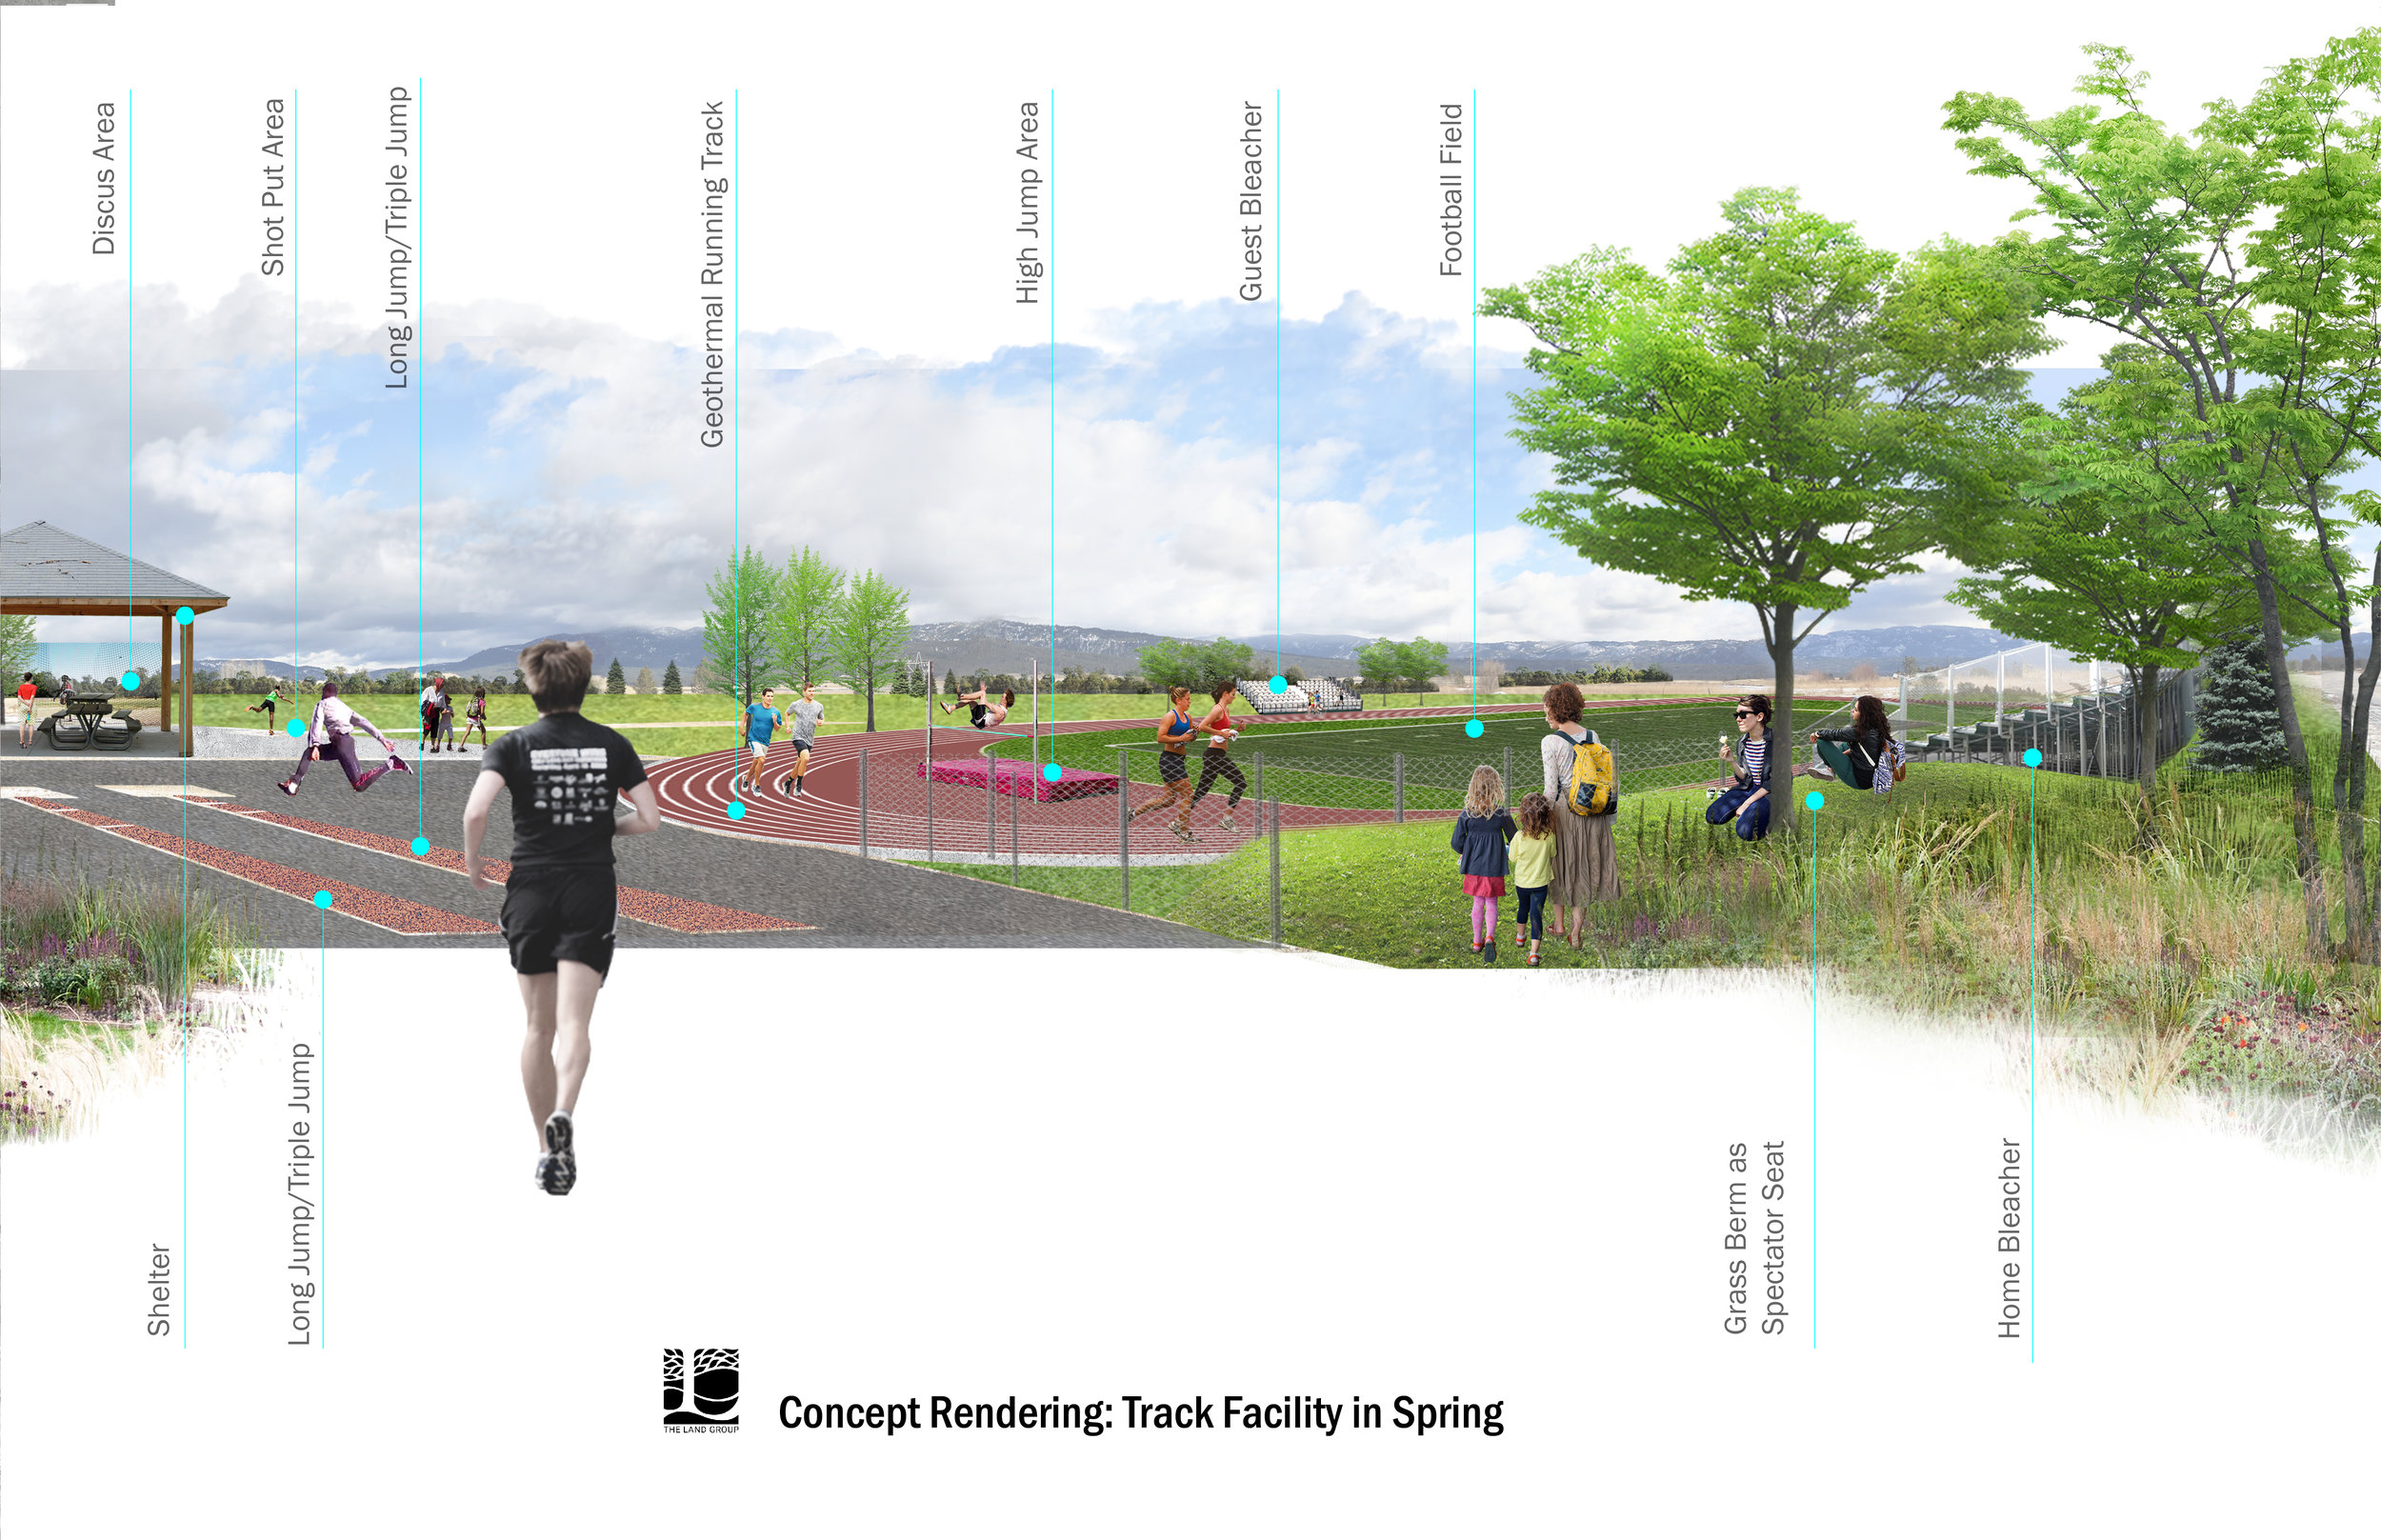 Concept rendering of track facility in spring